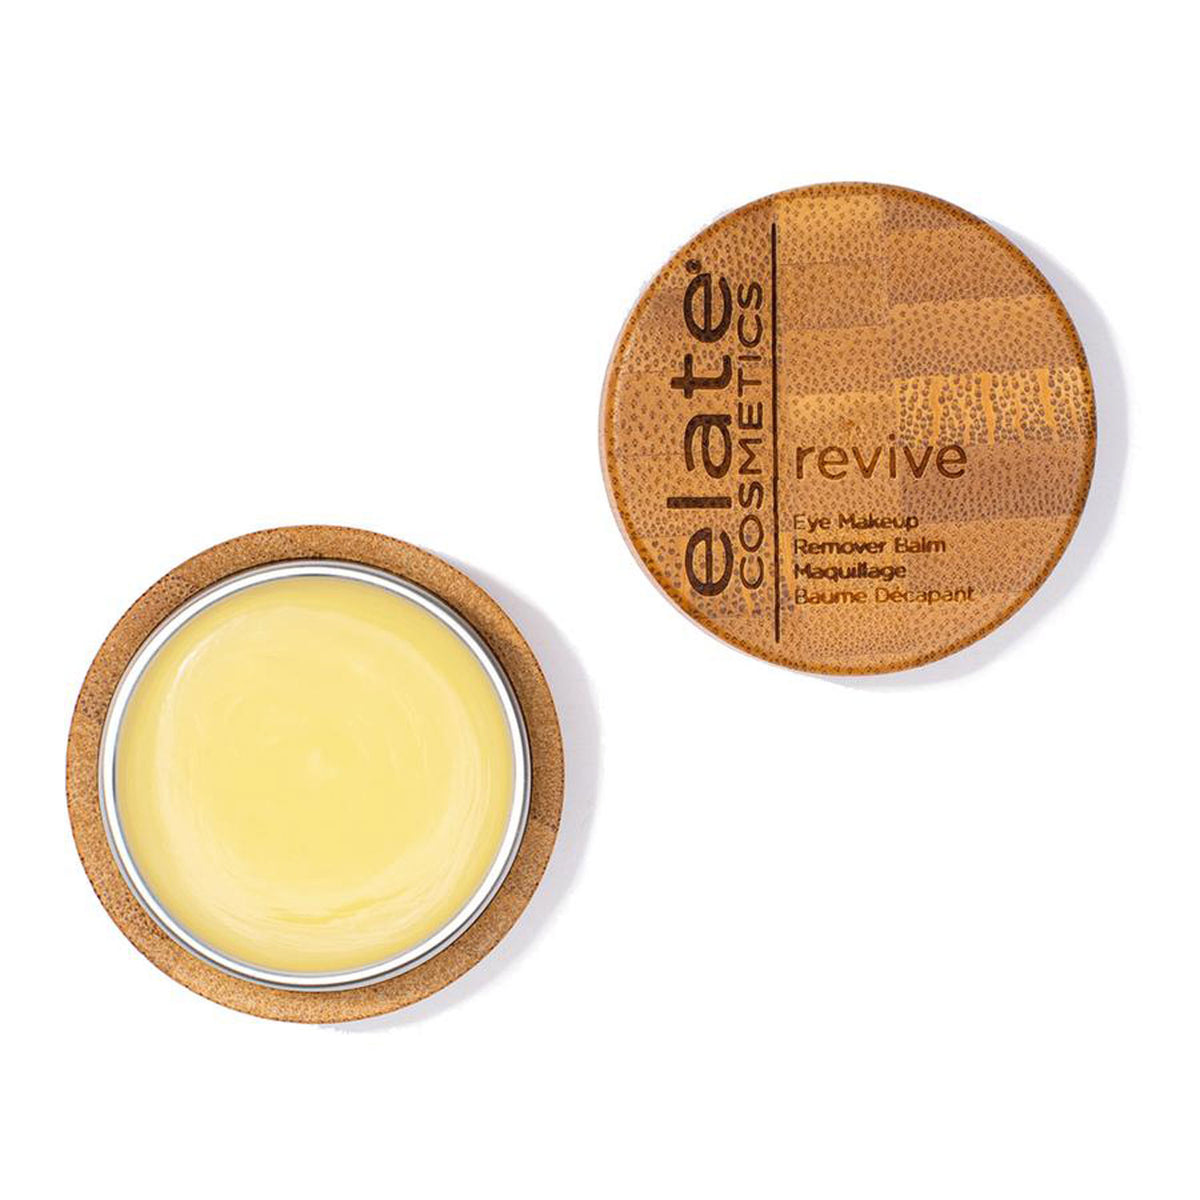 Open jar of cream colored remover balm cased in bamboo. Lid reads elate cosmetics revive